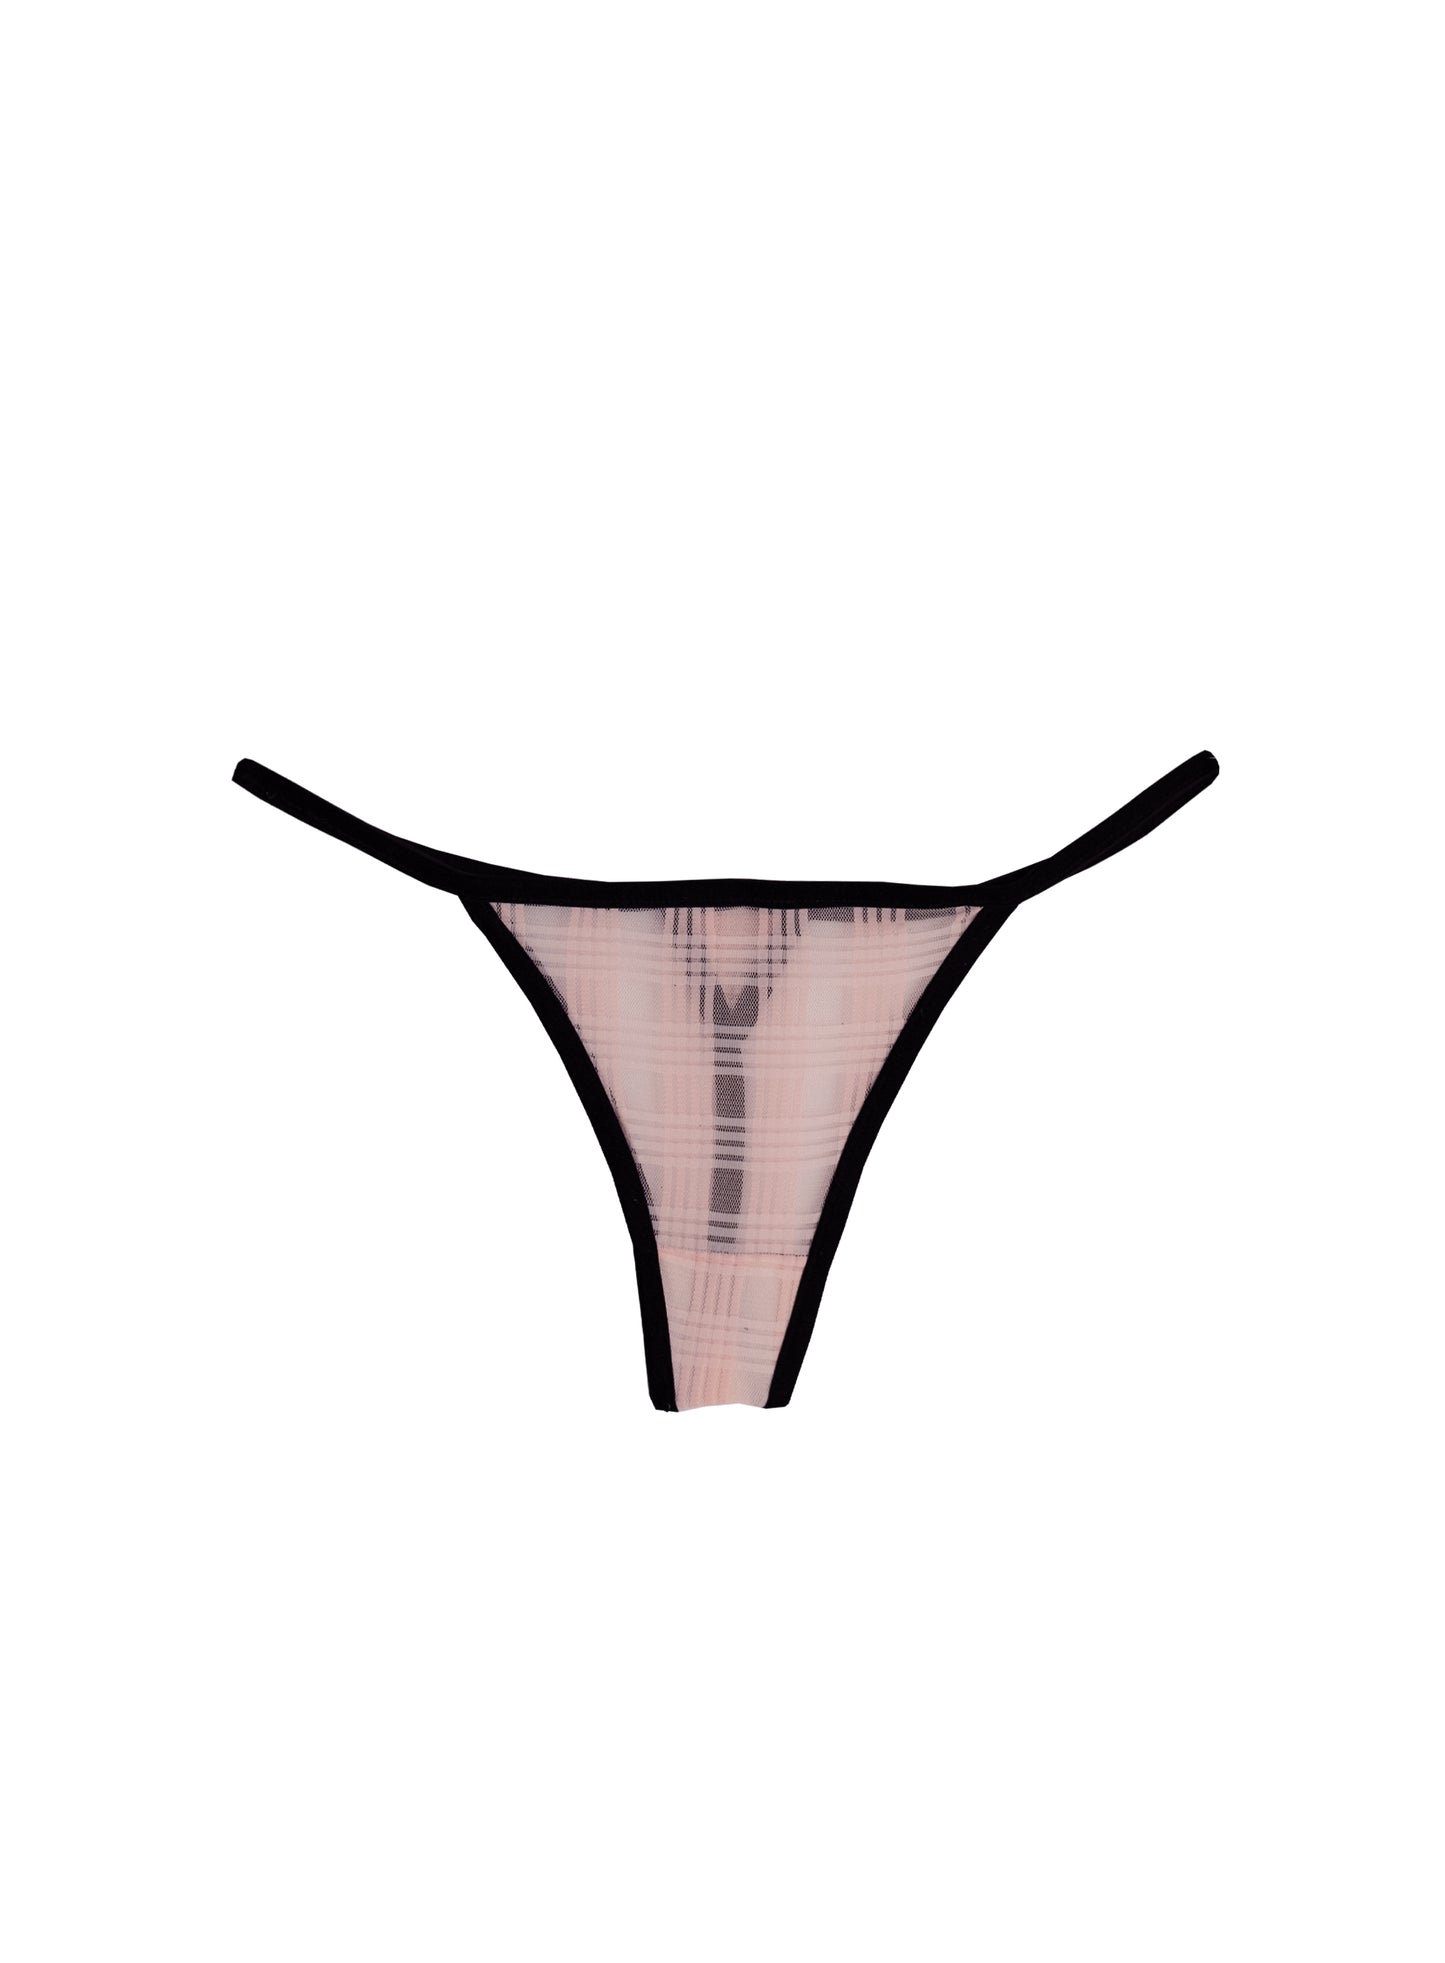 The She Ate G string